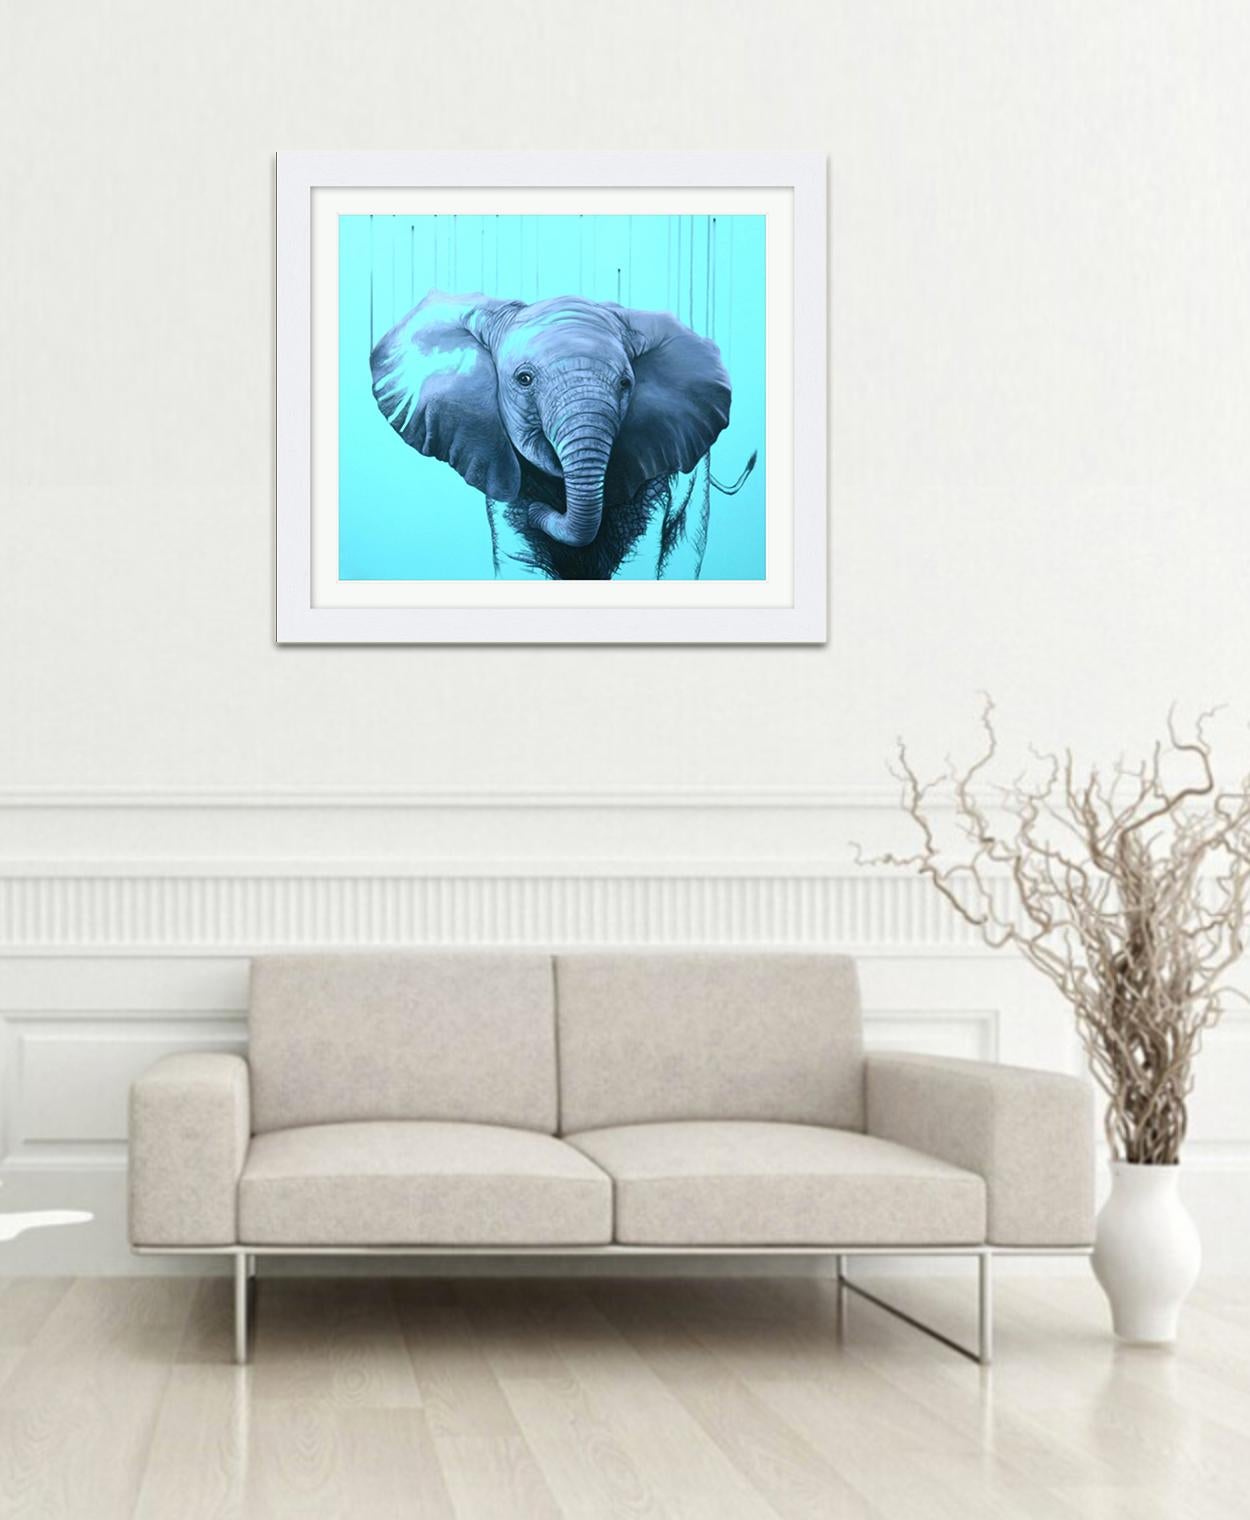 You are a Star by Louise McNaught - Blue Pop Elephant Animal Contemporary Print 5